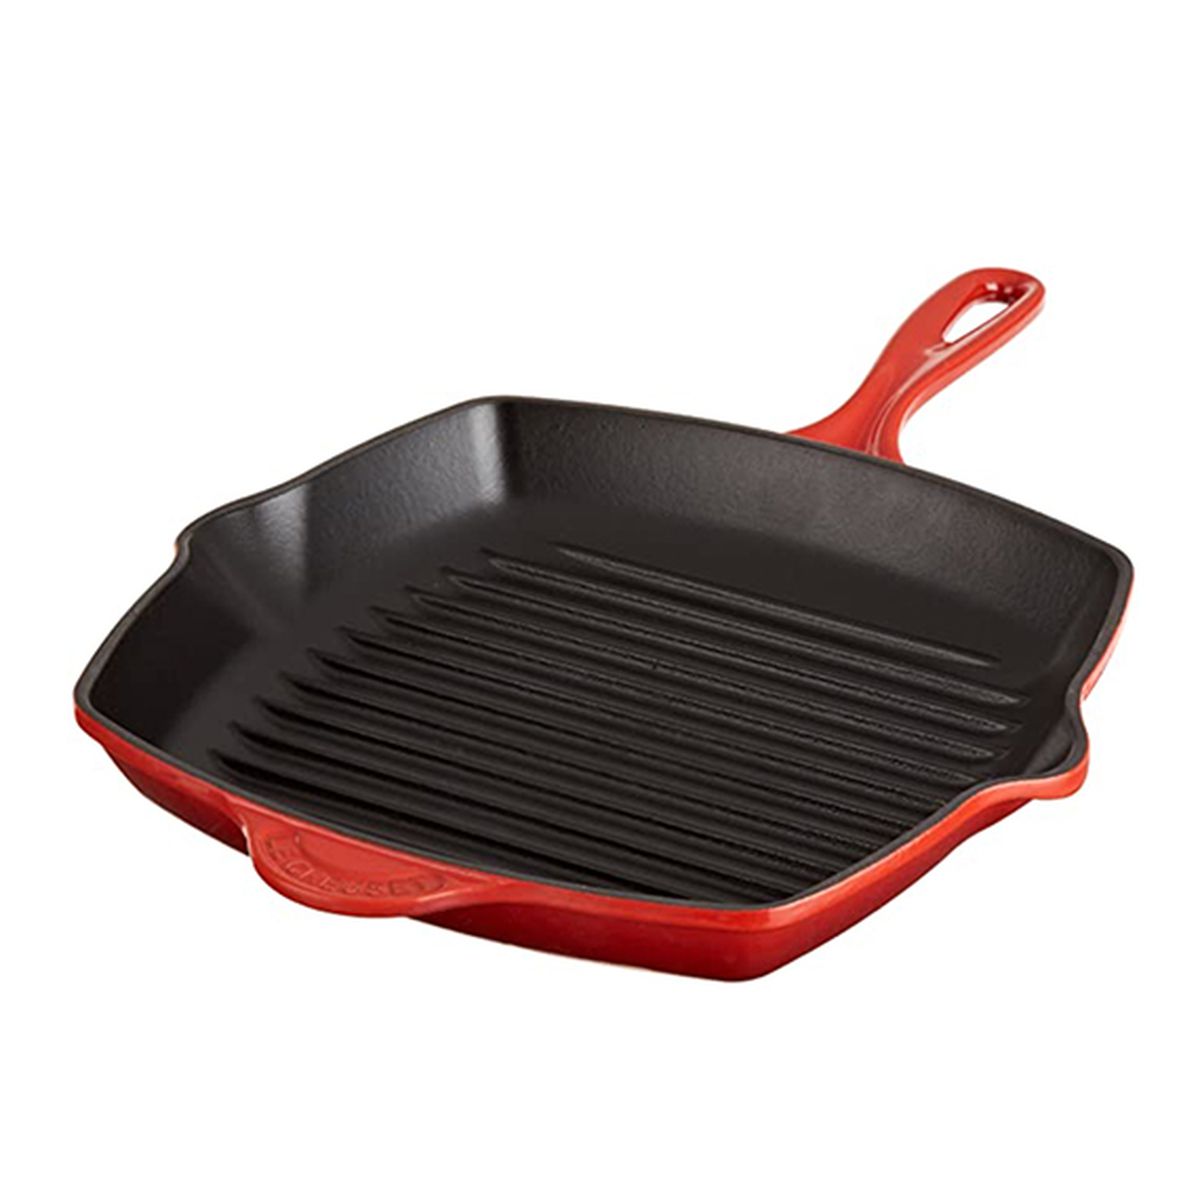 Red cast-iron pan.